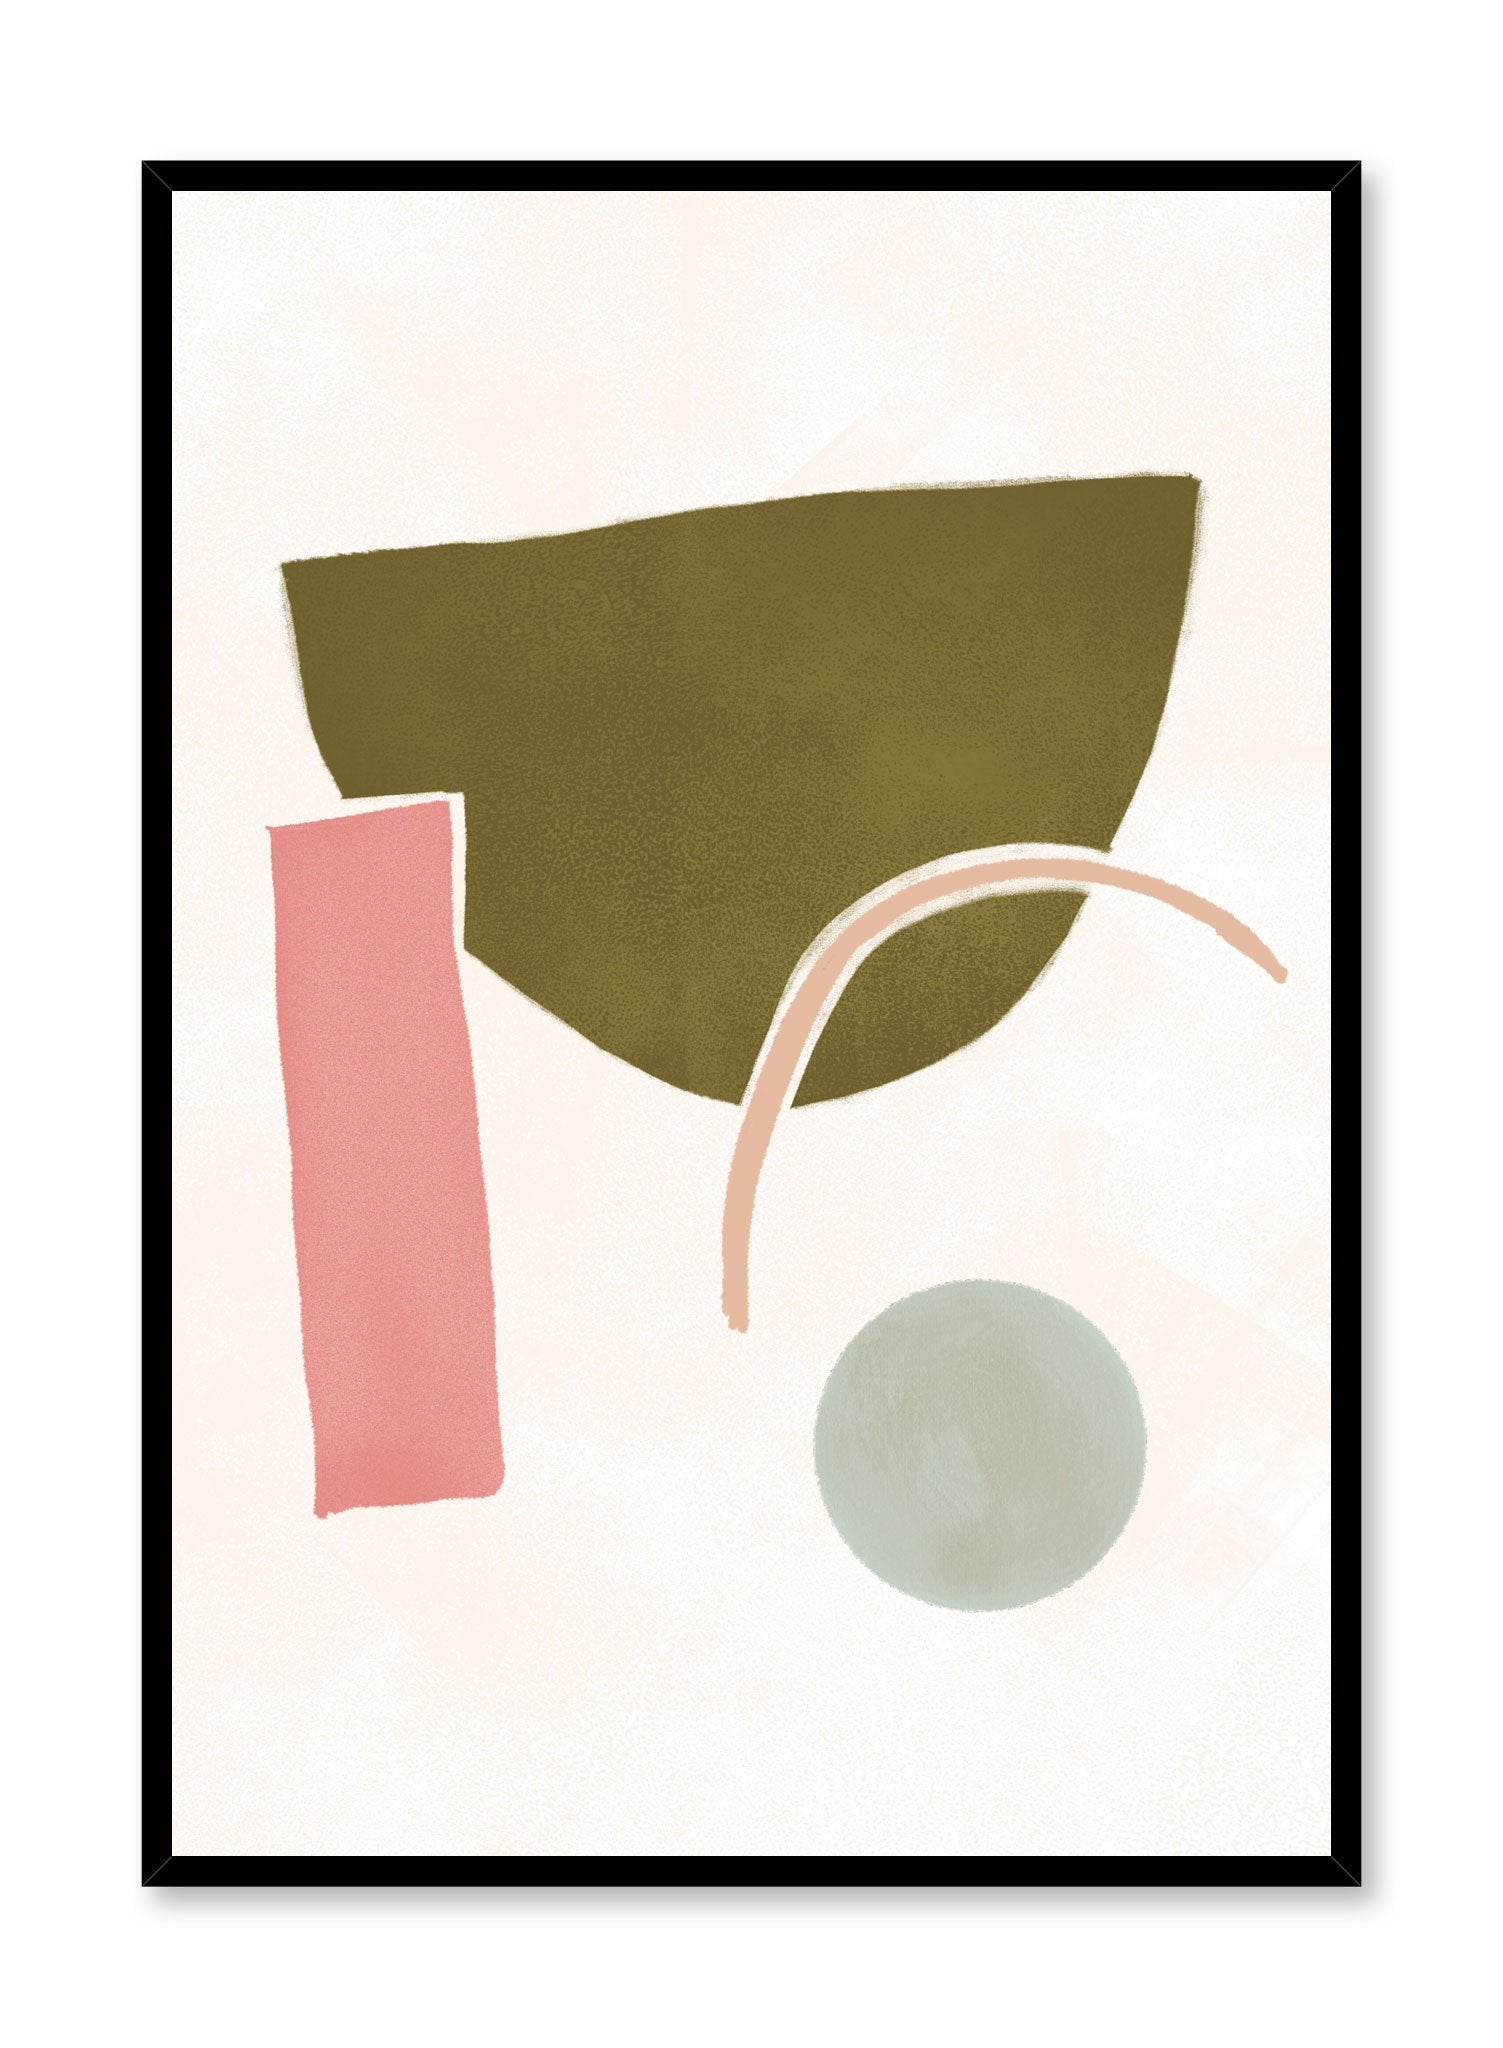 Modern minimalist poster by Opposite Wall with abstract design of Anxious by Toffie Affichiste